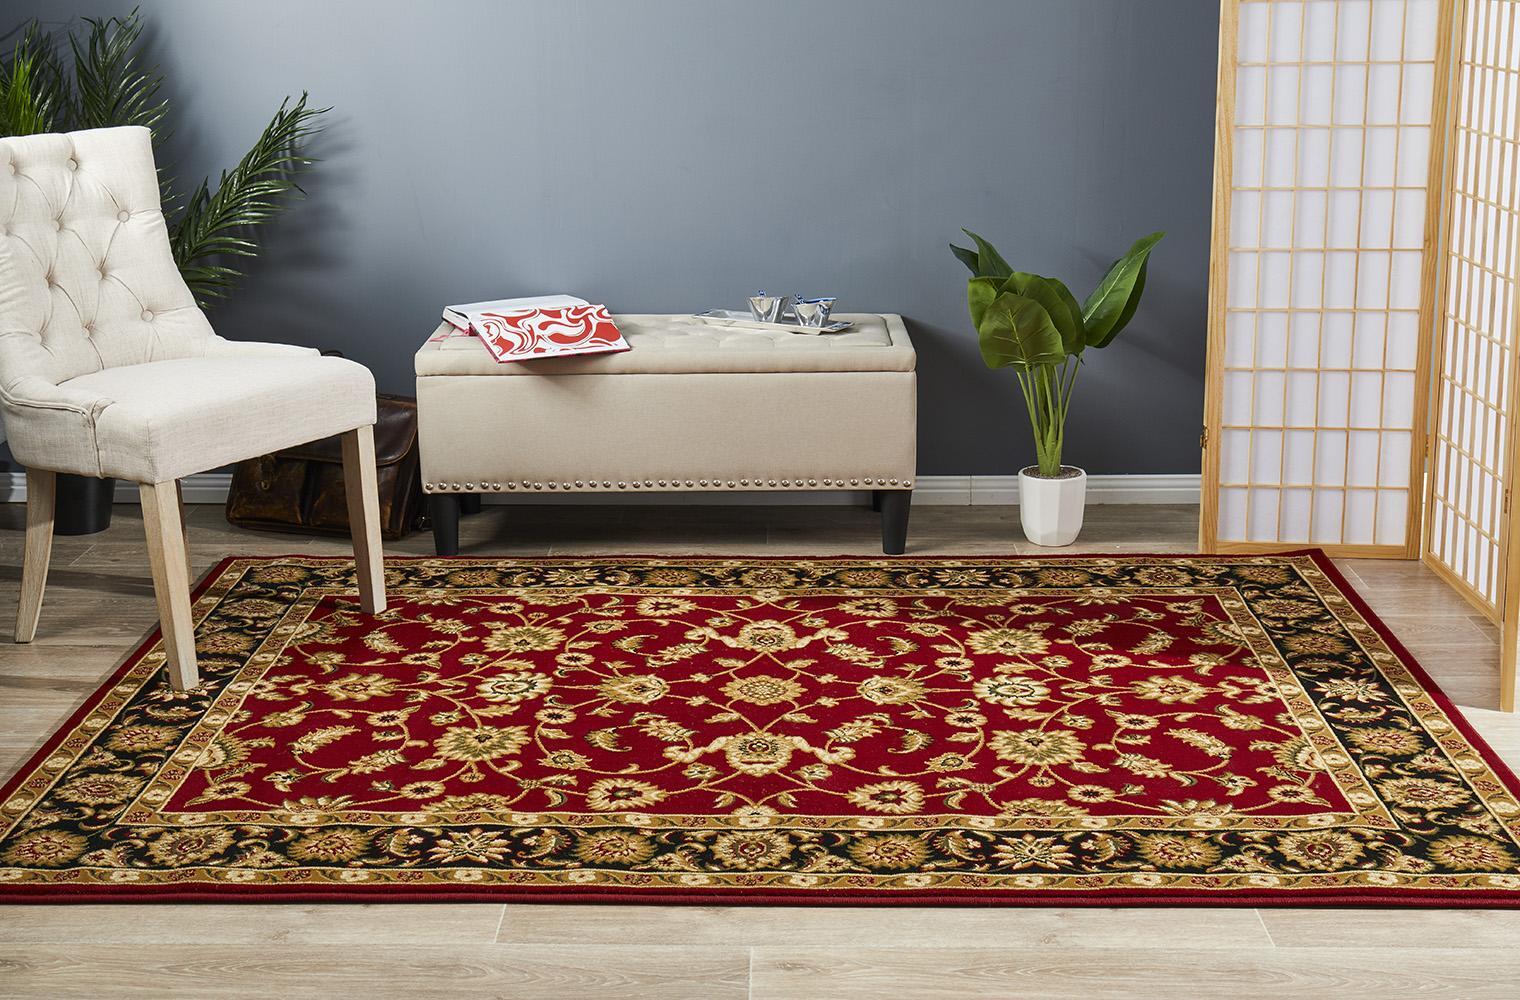 Rug Culture Classic Runner Red with Black Border 300x80cm